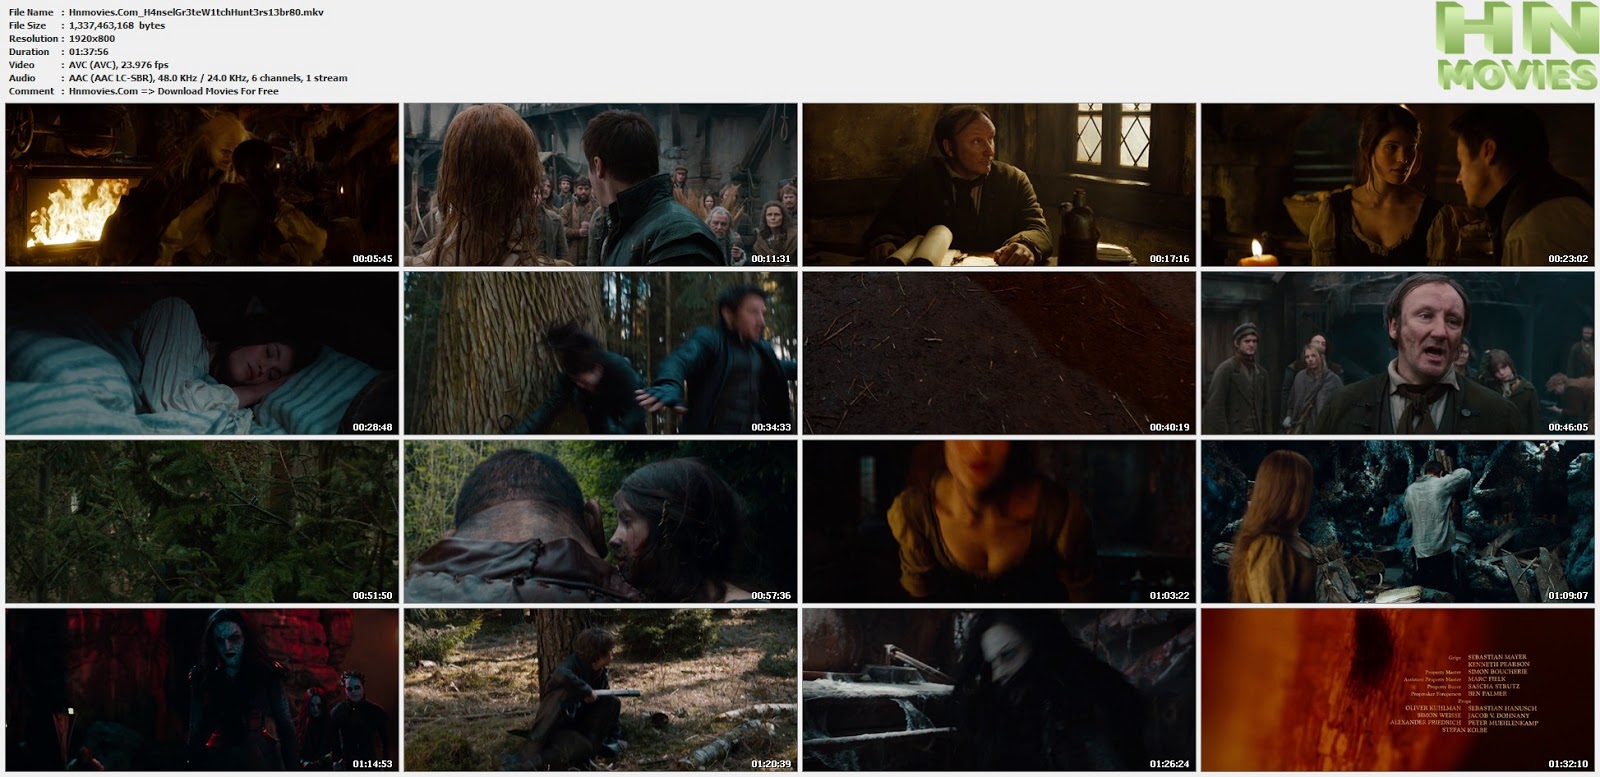 Hansel and Gretel Witch Hunters (2013) BluRay 1080p BRRip Extended Cut 5.1CH 1.25GB Hnmovies.Com_H4nselGr3teW1tchHunt3rs13br80.mkv